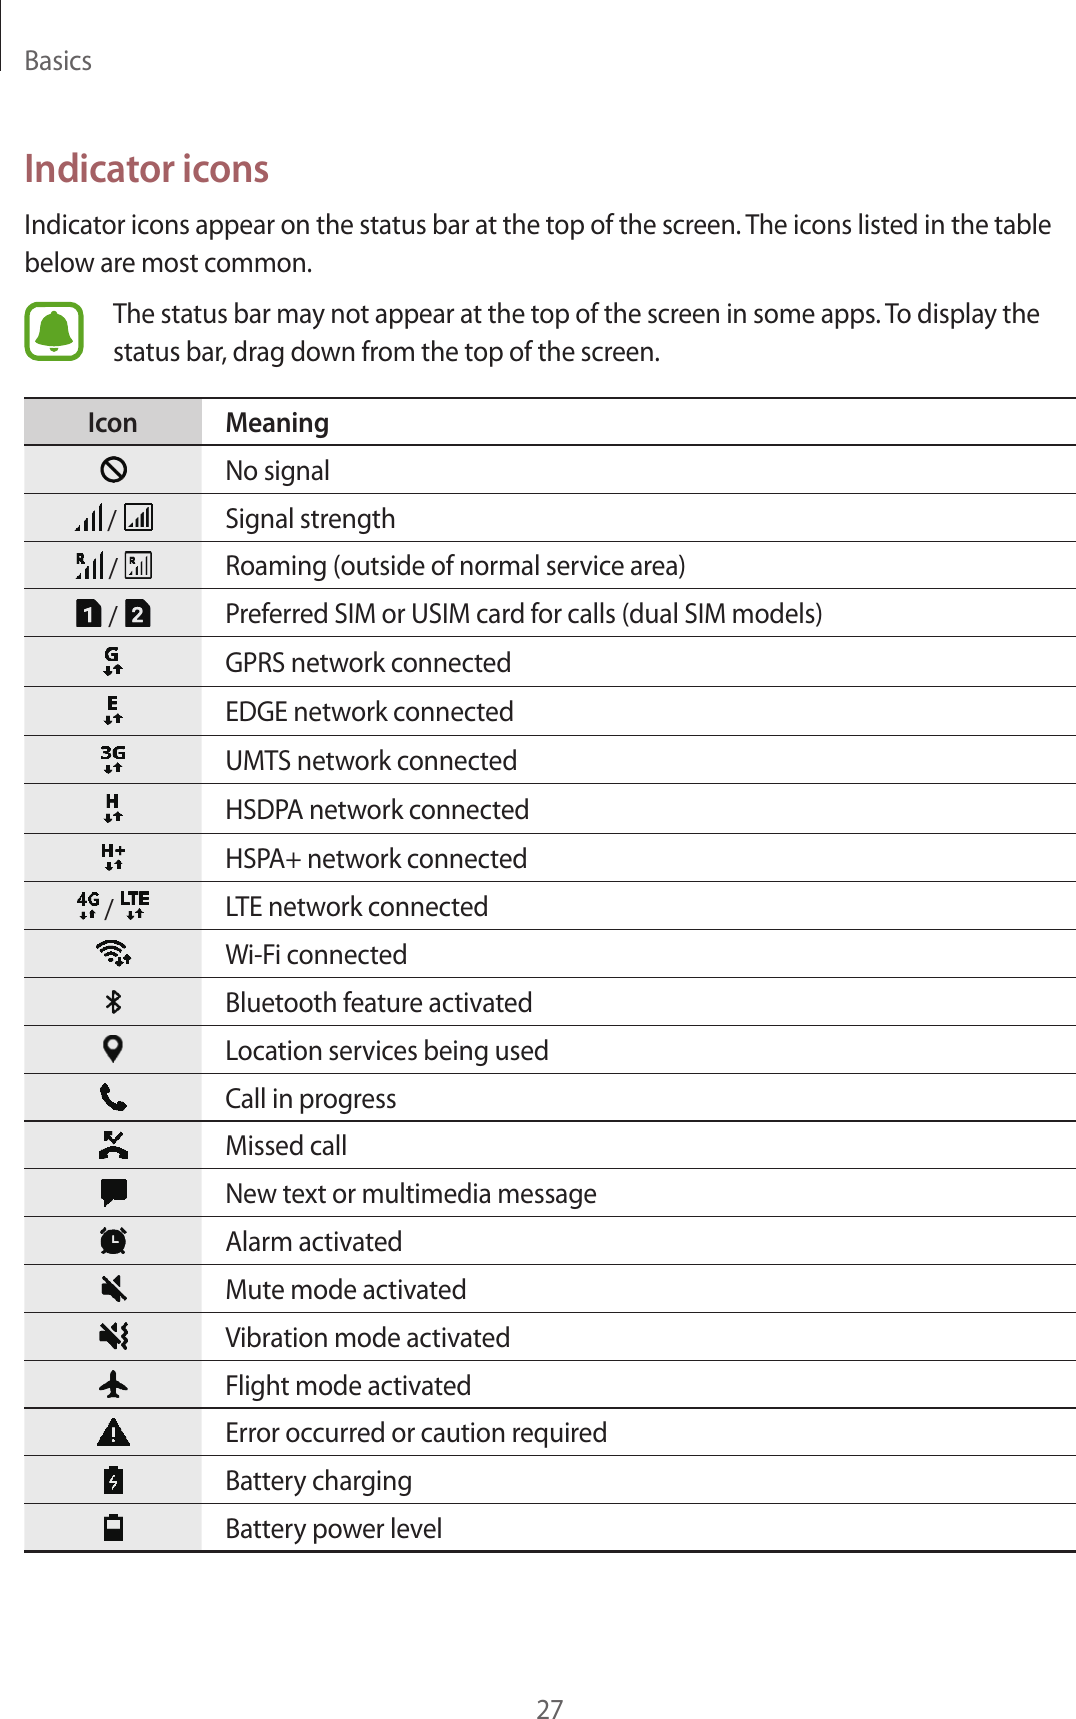 Basics27Indicator iconsIndicator icons appear on the status bar at the top of the screen. The icons listed in the table below are most common.The status bar may not appear at the top of the screen in some apps. To display the status bar, drag down from the top of the screen.Icon MeaningNo signal /  Signal strength /  Roaming (outside of normal service area) /  Preferred SIM or USIM card for calls (dual SIM models)GPRS network connectedEDGE network connectedUMTS network connectedHSDPA network connectedHSPA+ network connected /  LTE network connectedWi-Fi connectedBluetooth feature activatedLocation services being usedCall in progressMissed callNew text or multimedia messageAlarm activatedMute mode activatedVibration mode activatedFlight mode activatedError occurred or caution requiredBattery chargingBattery power level